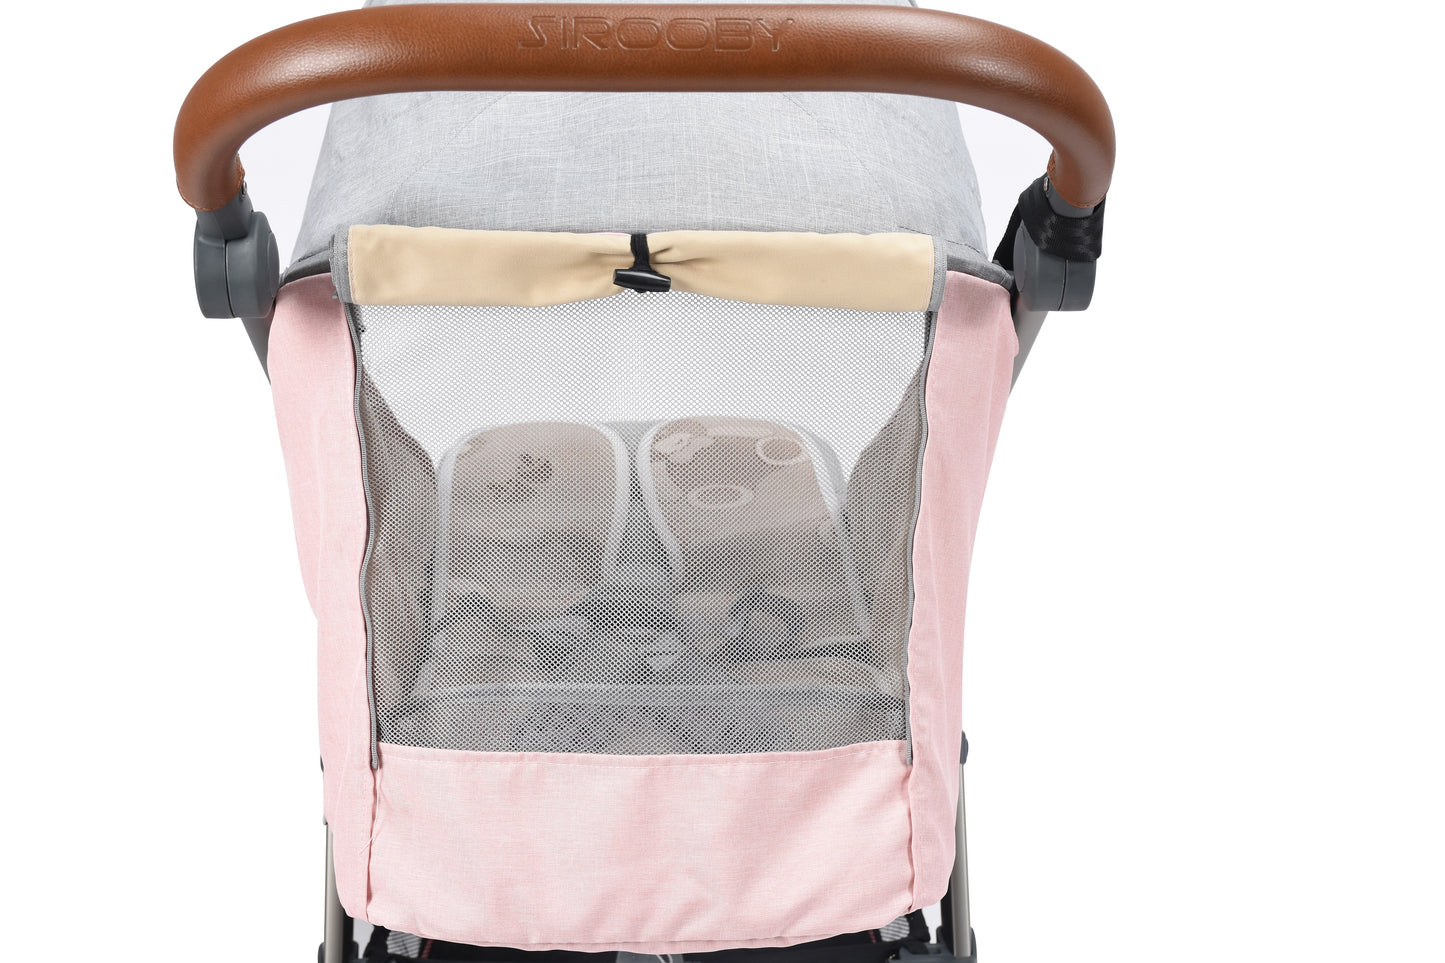 Buggy for toddlers